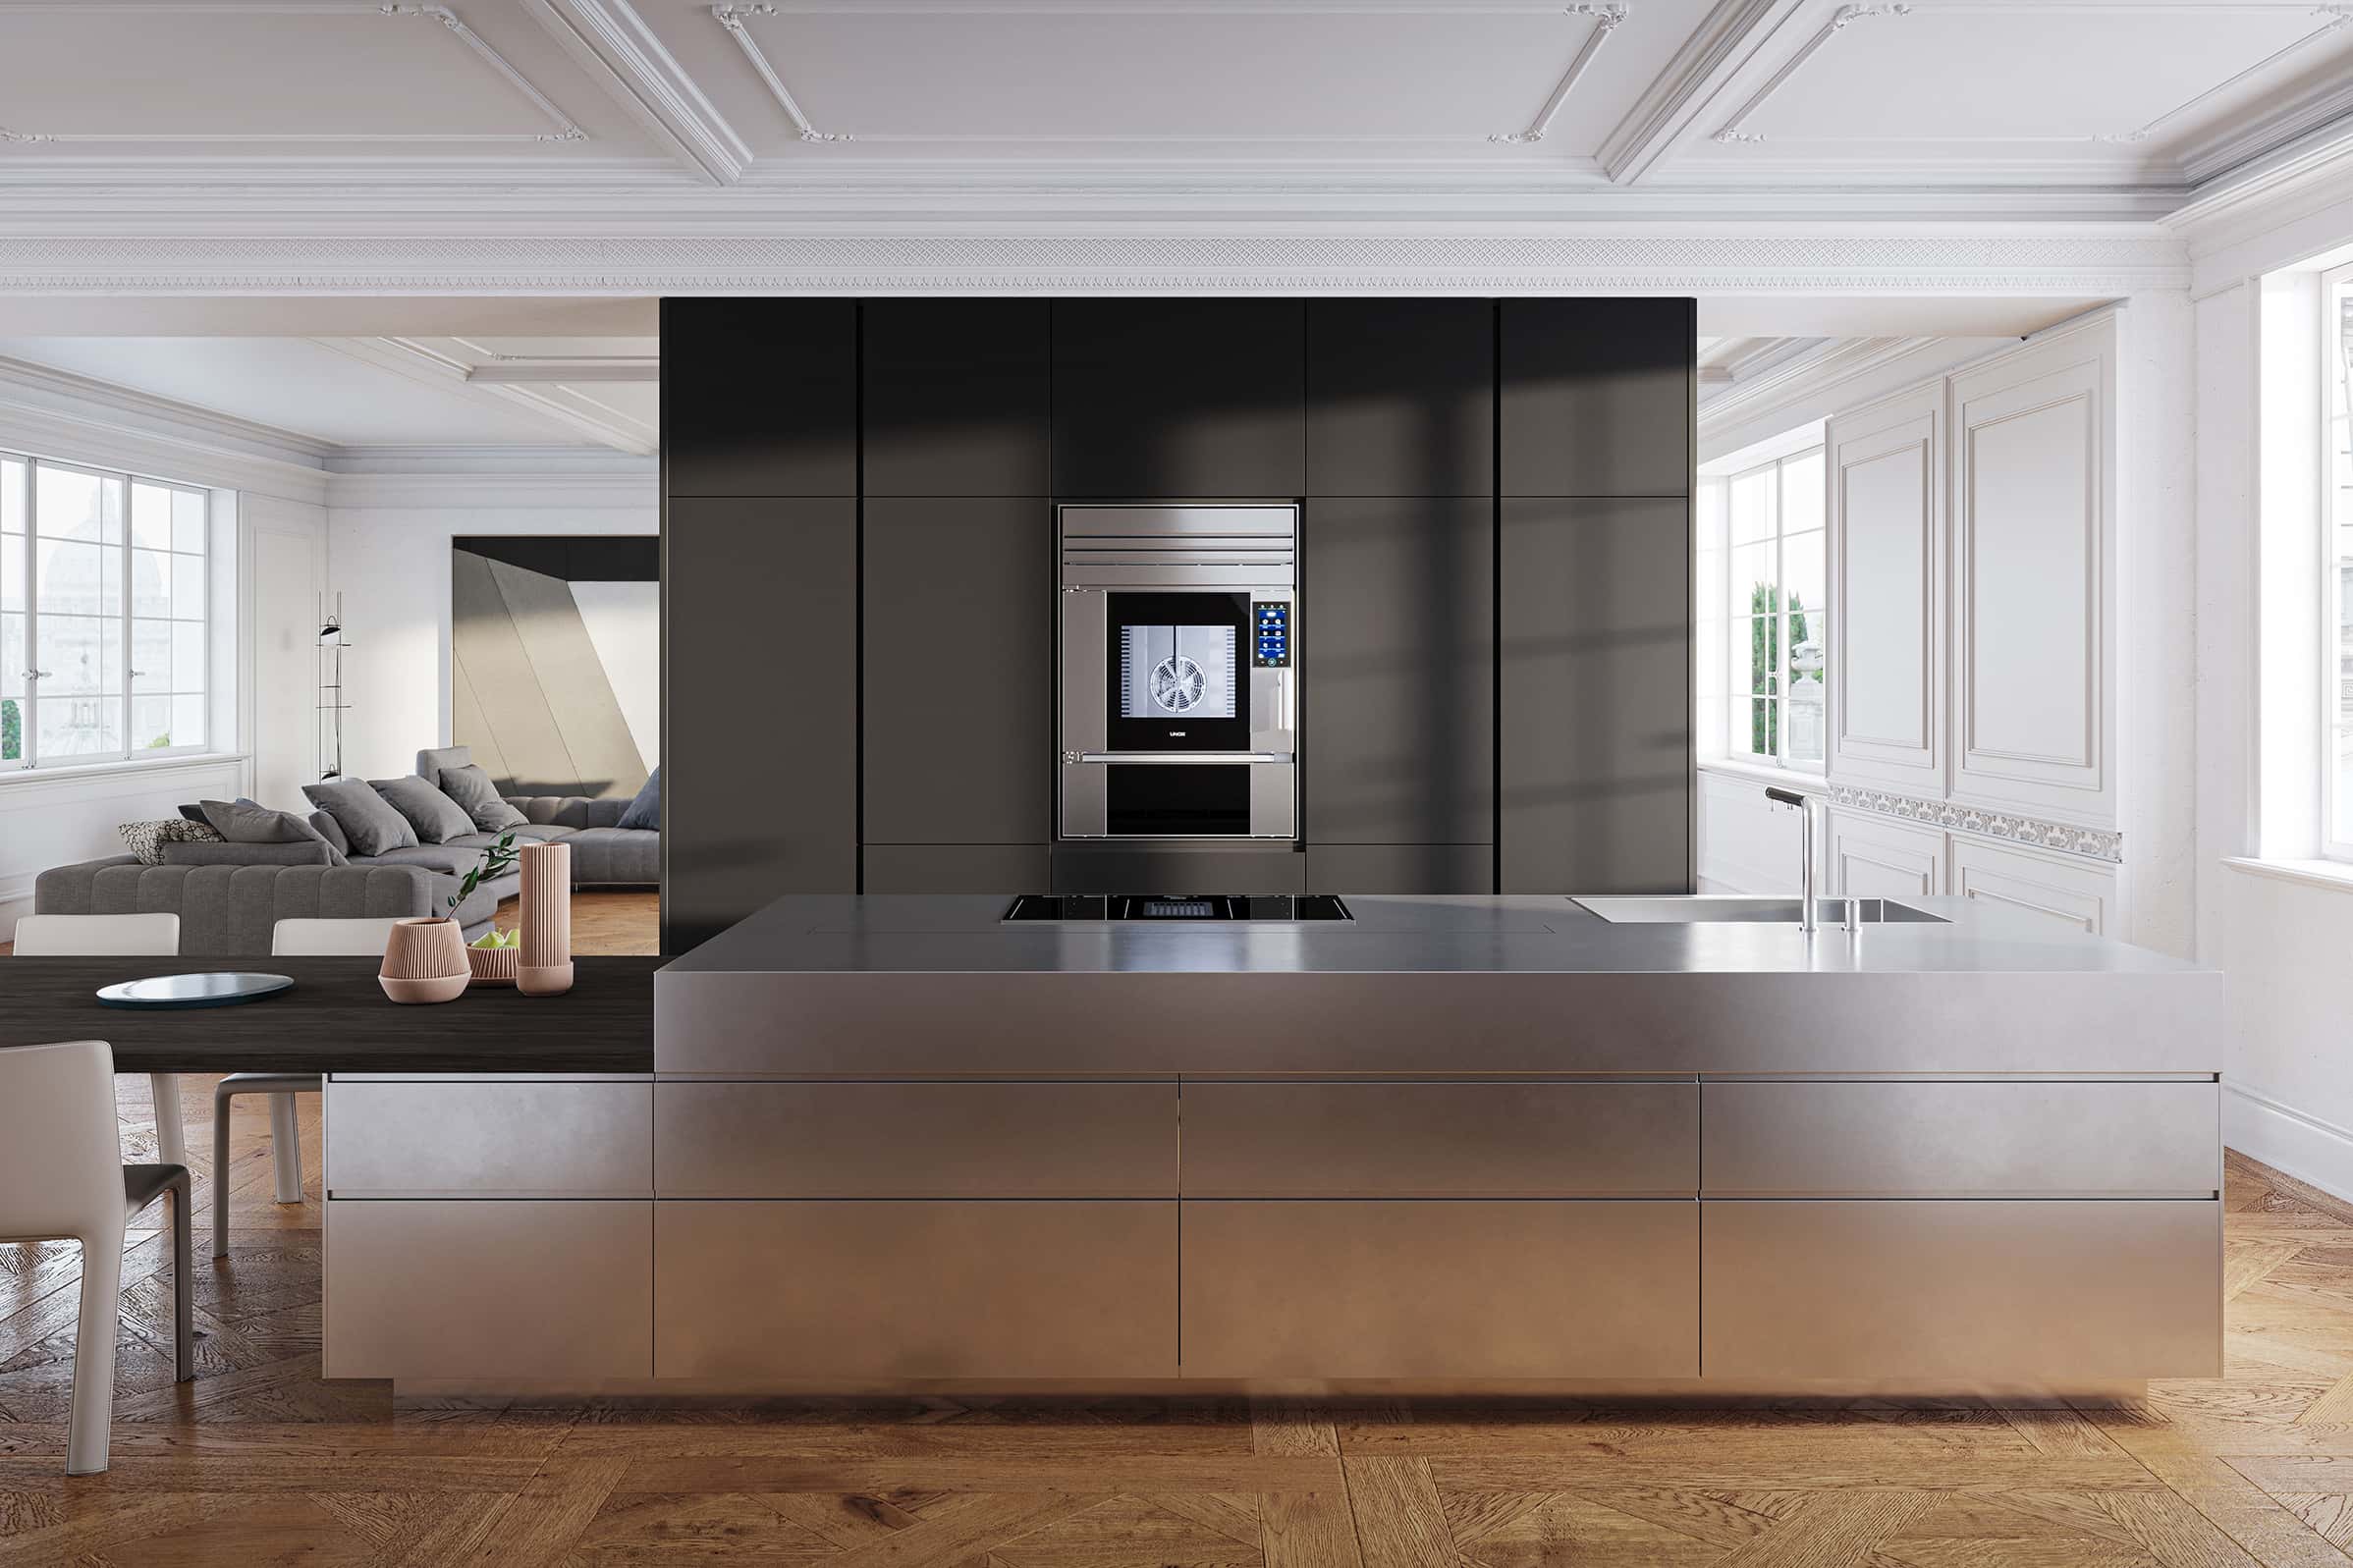 Unox Casa's SuperOven commercial oven for home in a luxury kitchen in Paris